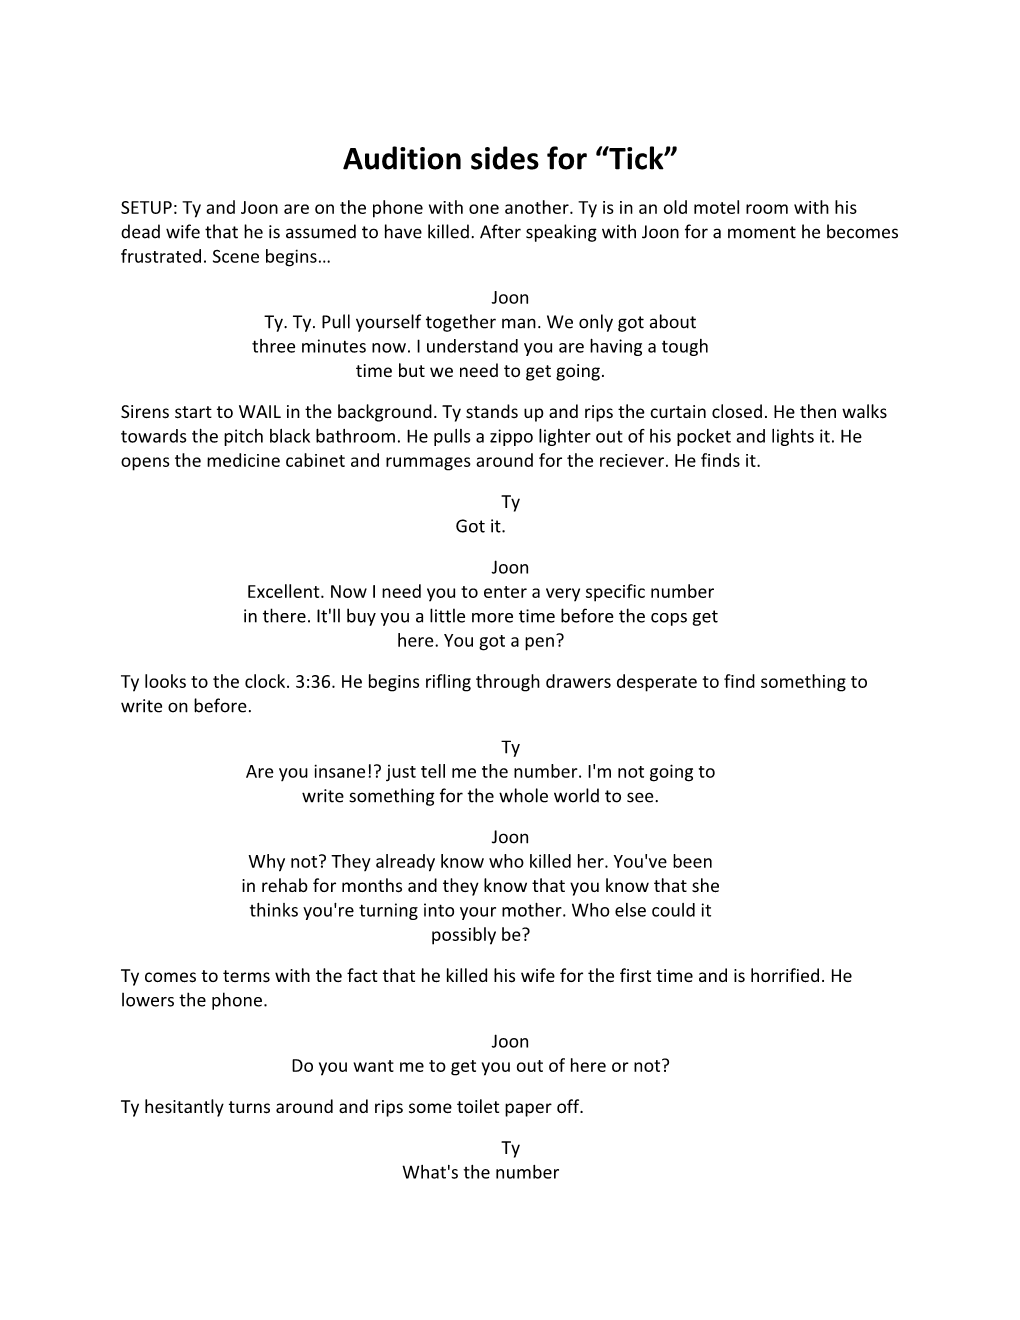 Audition Sides for Tick